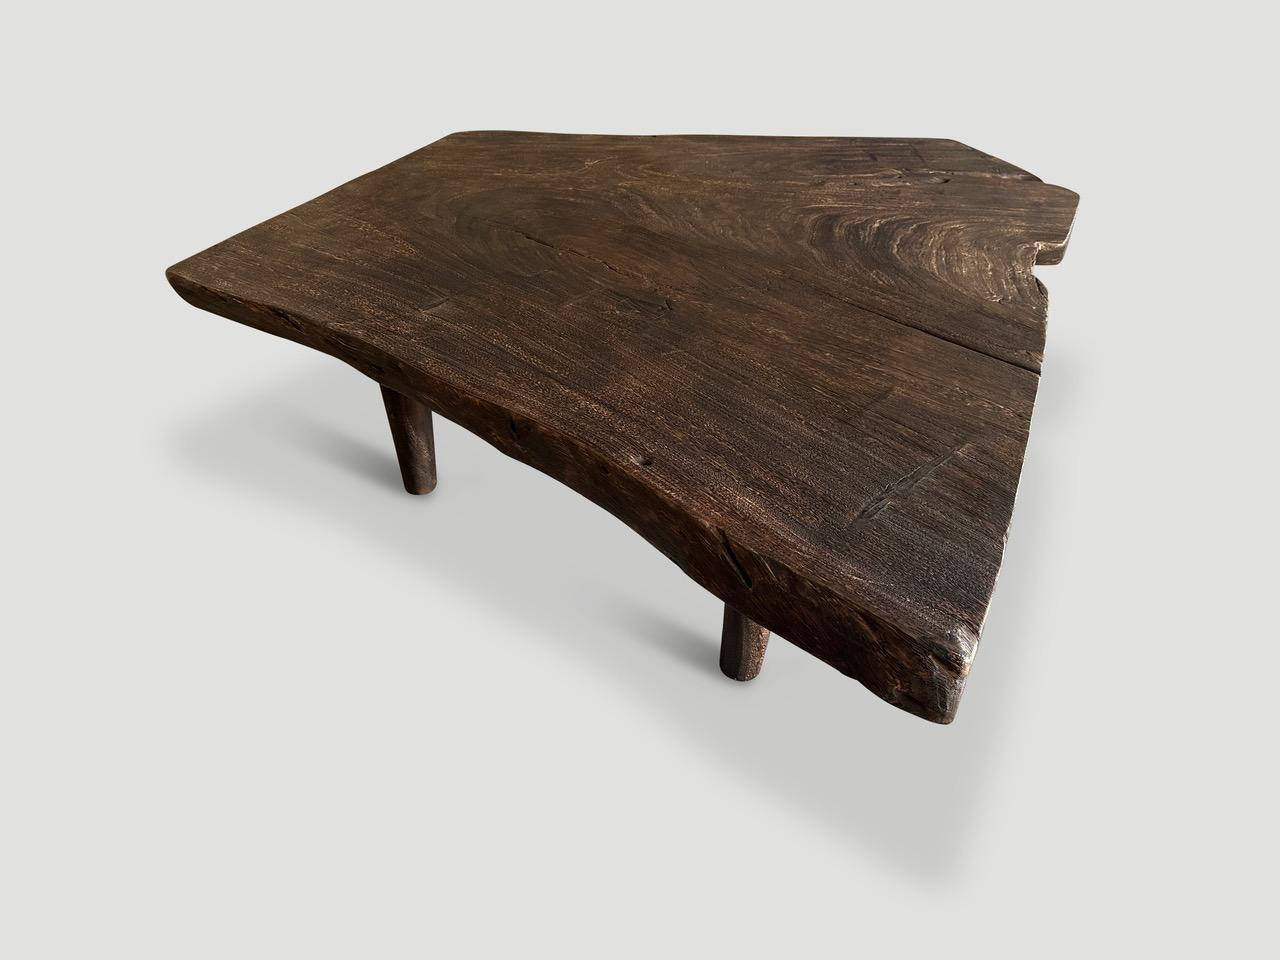 Andrianna Shamaris Single Charred Suar Wood Coffee Table  In Excellent Condition For Sale In New York, NY